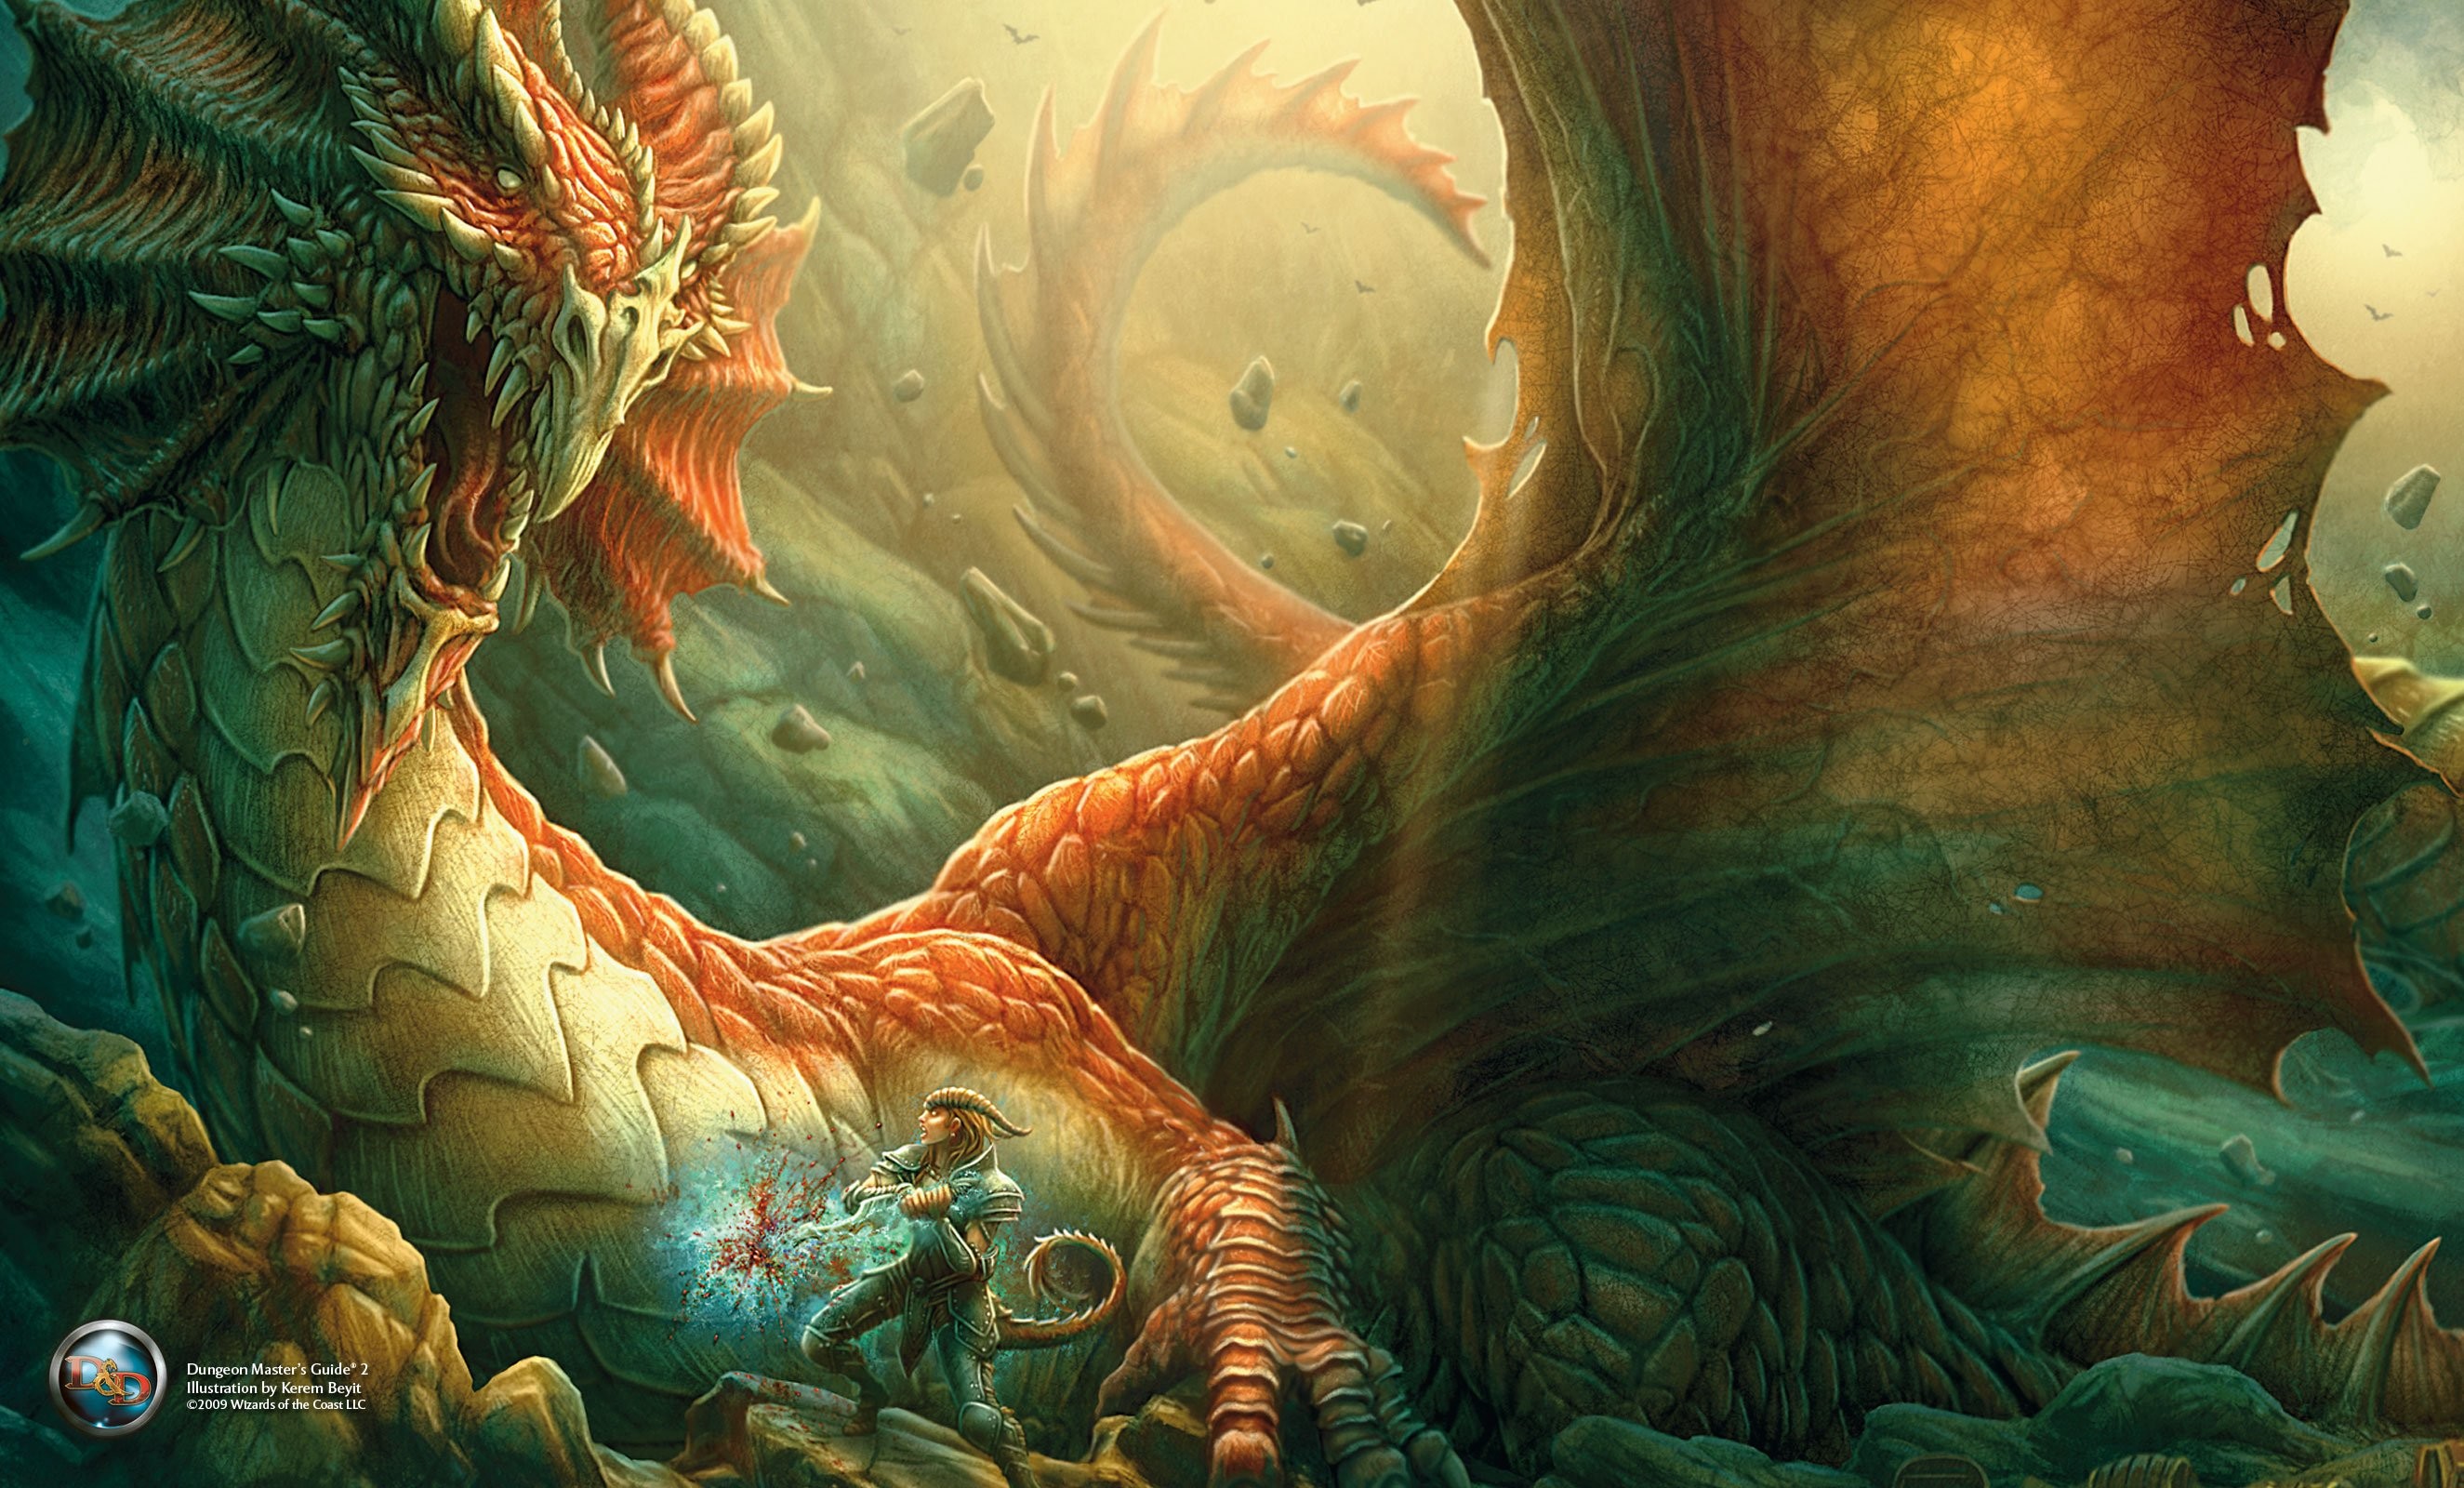 2650x1600 DUNGEONS-AND-DRAGONS fantasy adventure board rpg dungeons dragons (44)  wallpaper |  | 388772 | WallpaperUP